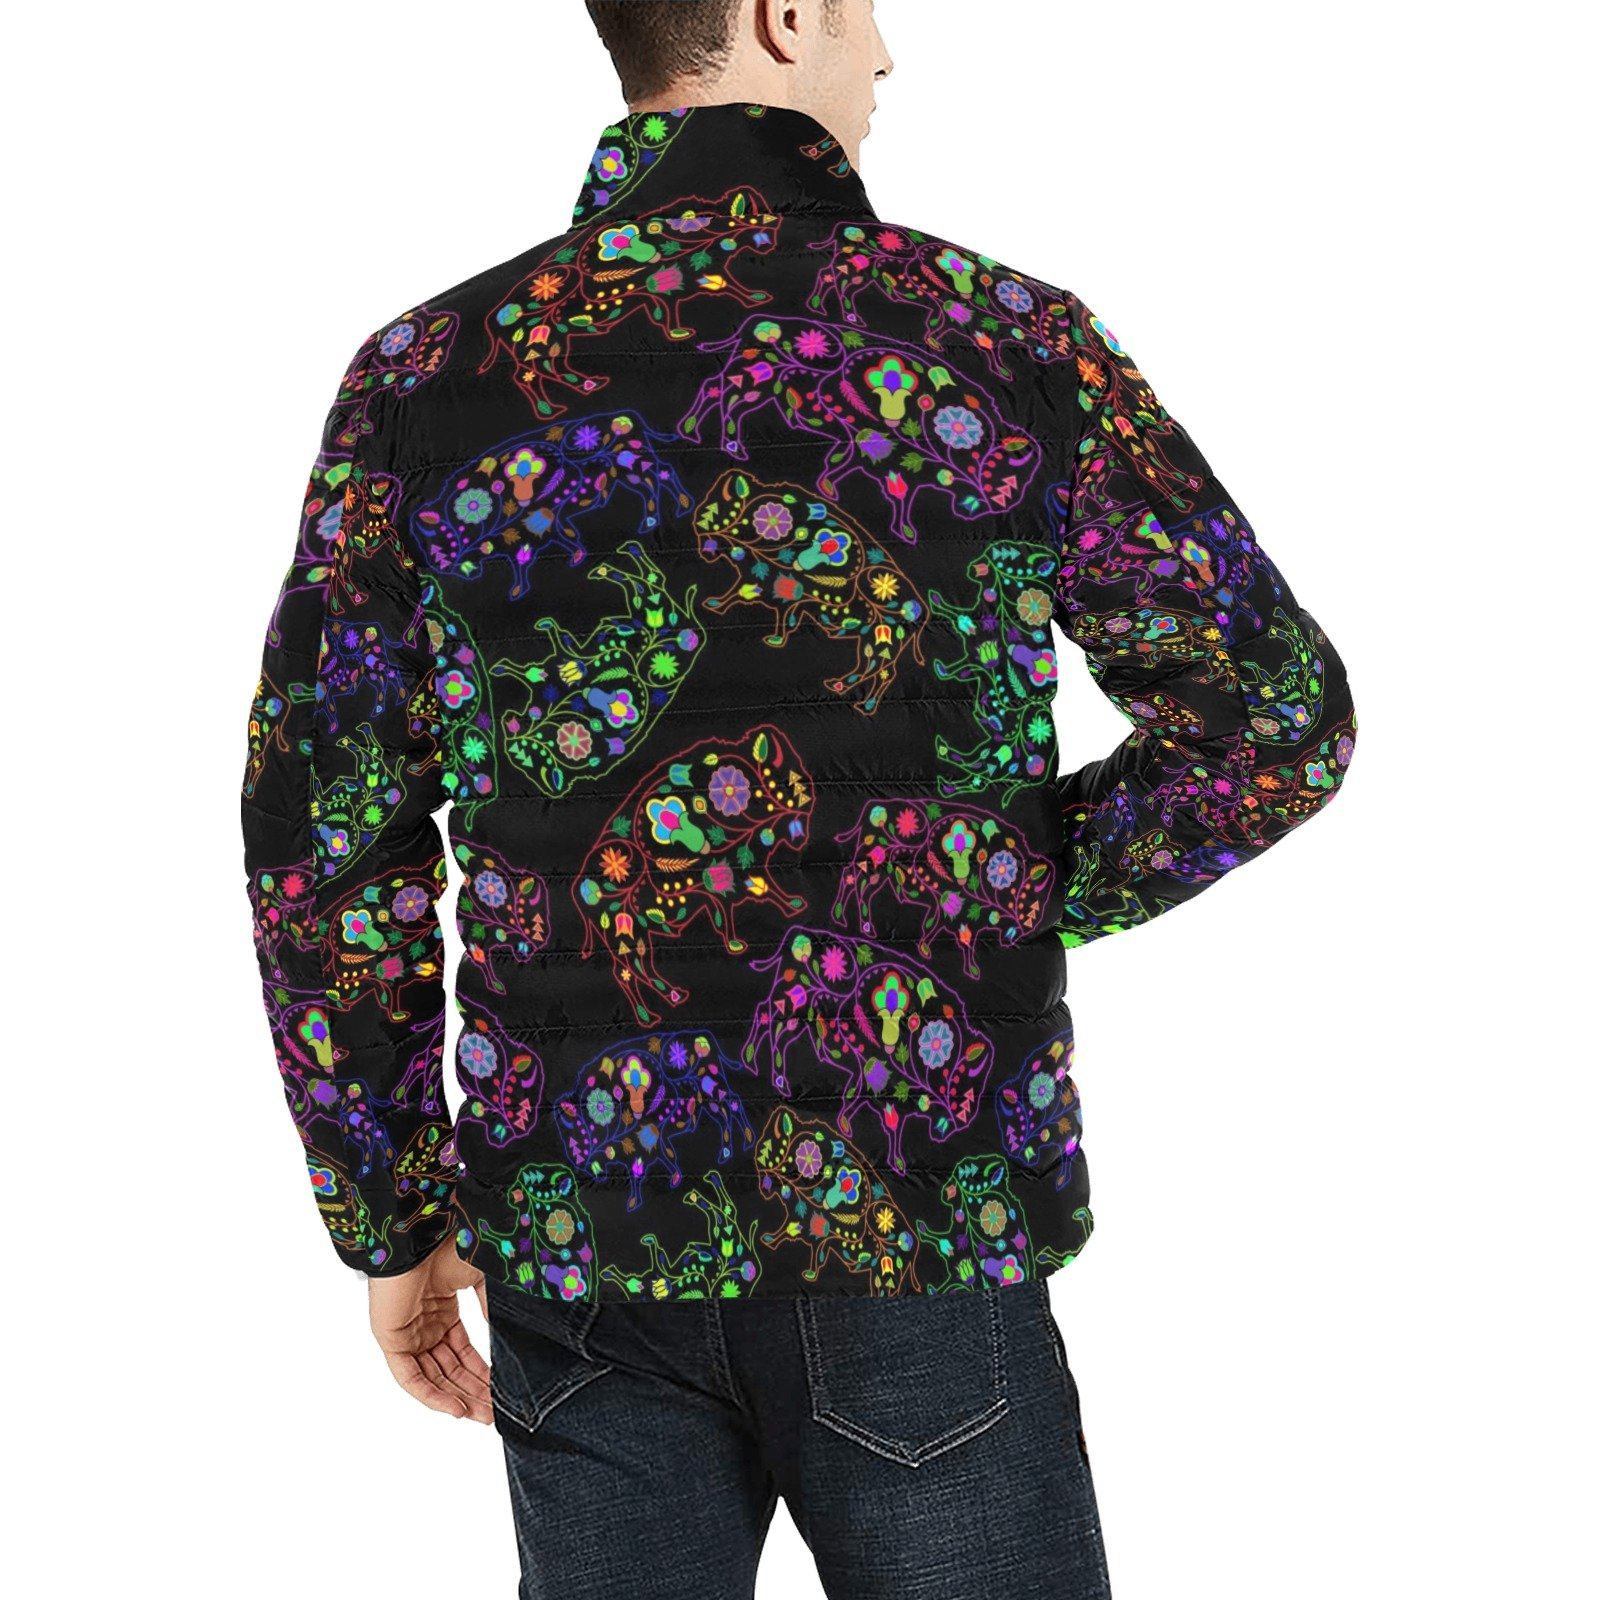 Floral Buffalo Men's Stand Collar Padded Jacket (Model H41) Men's Stand Collar Padded Jacket (H41) e-joyer 